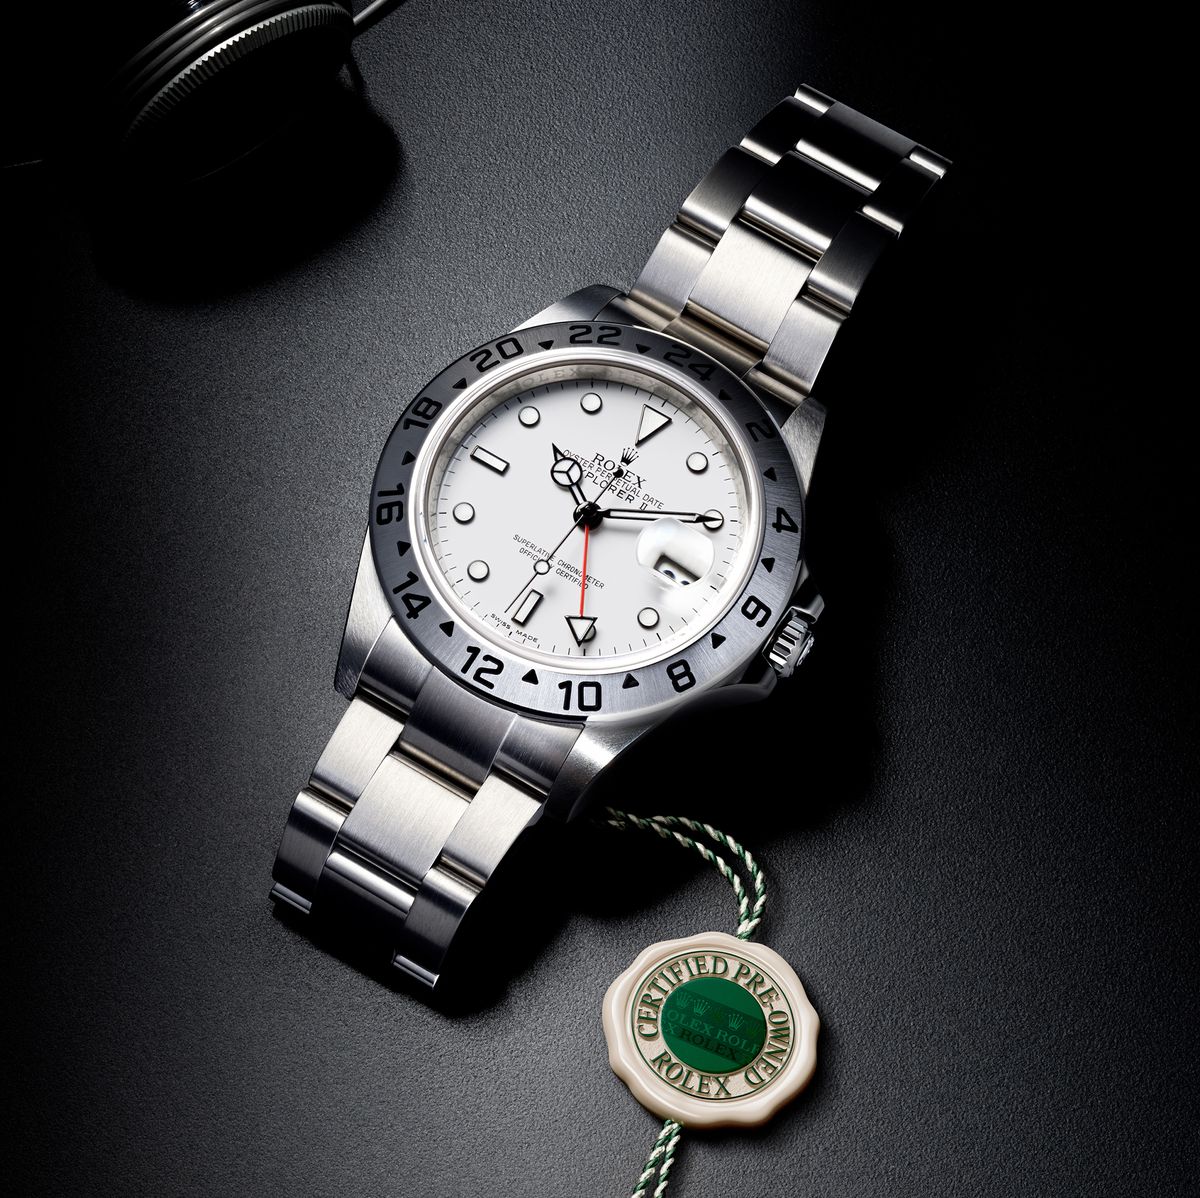 Rolex's Pre-Owned Is Coming